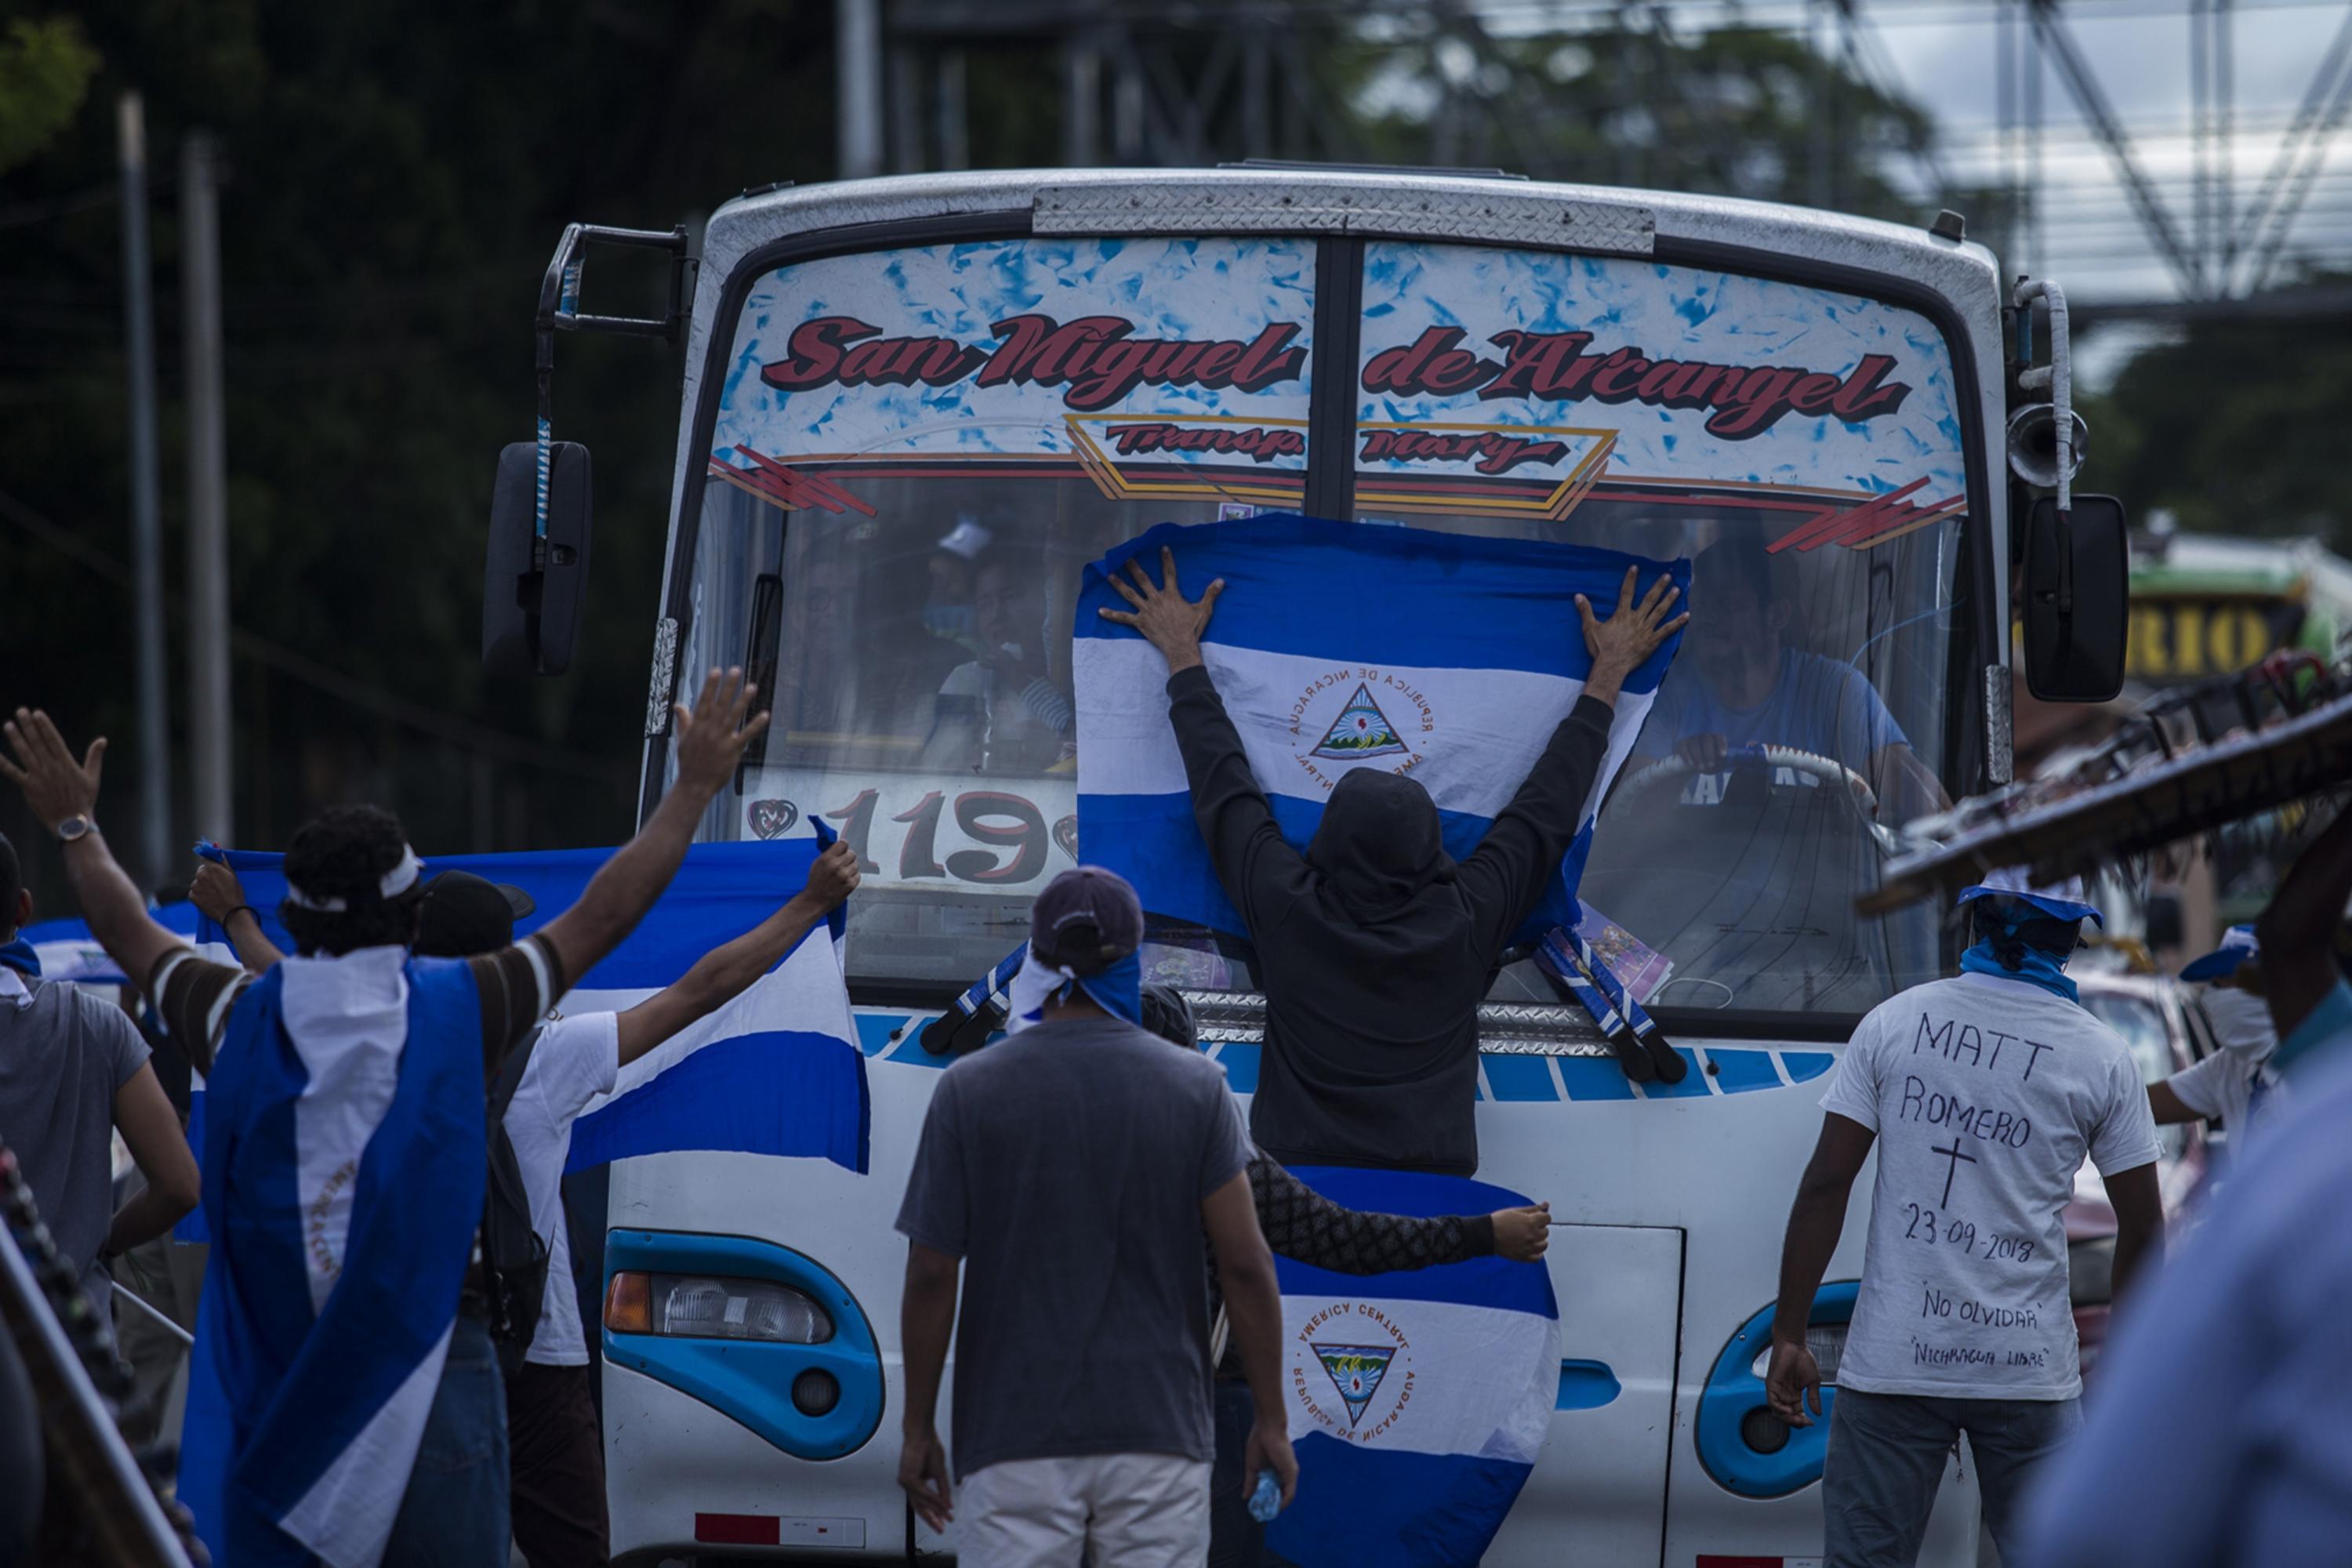 A group of around 100 people at a protest in front of the UCA in Managua on Sep. 26, 2018. The Police blocked the street to cut off the path of the anti-government march. Photo Víctor Peña